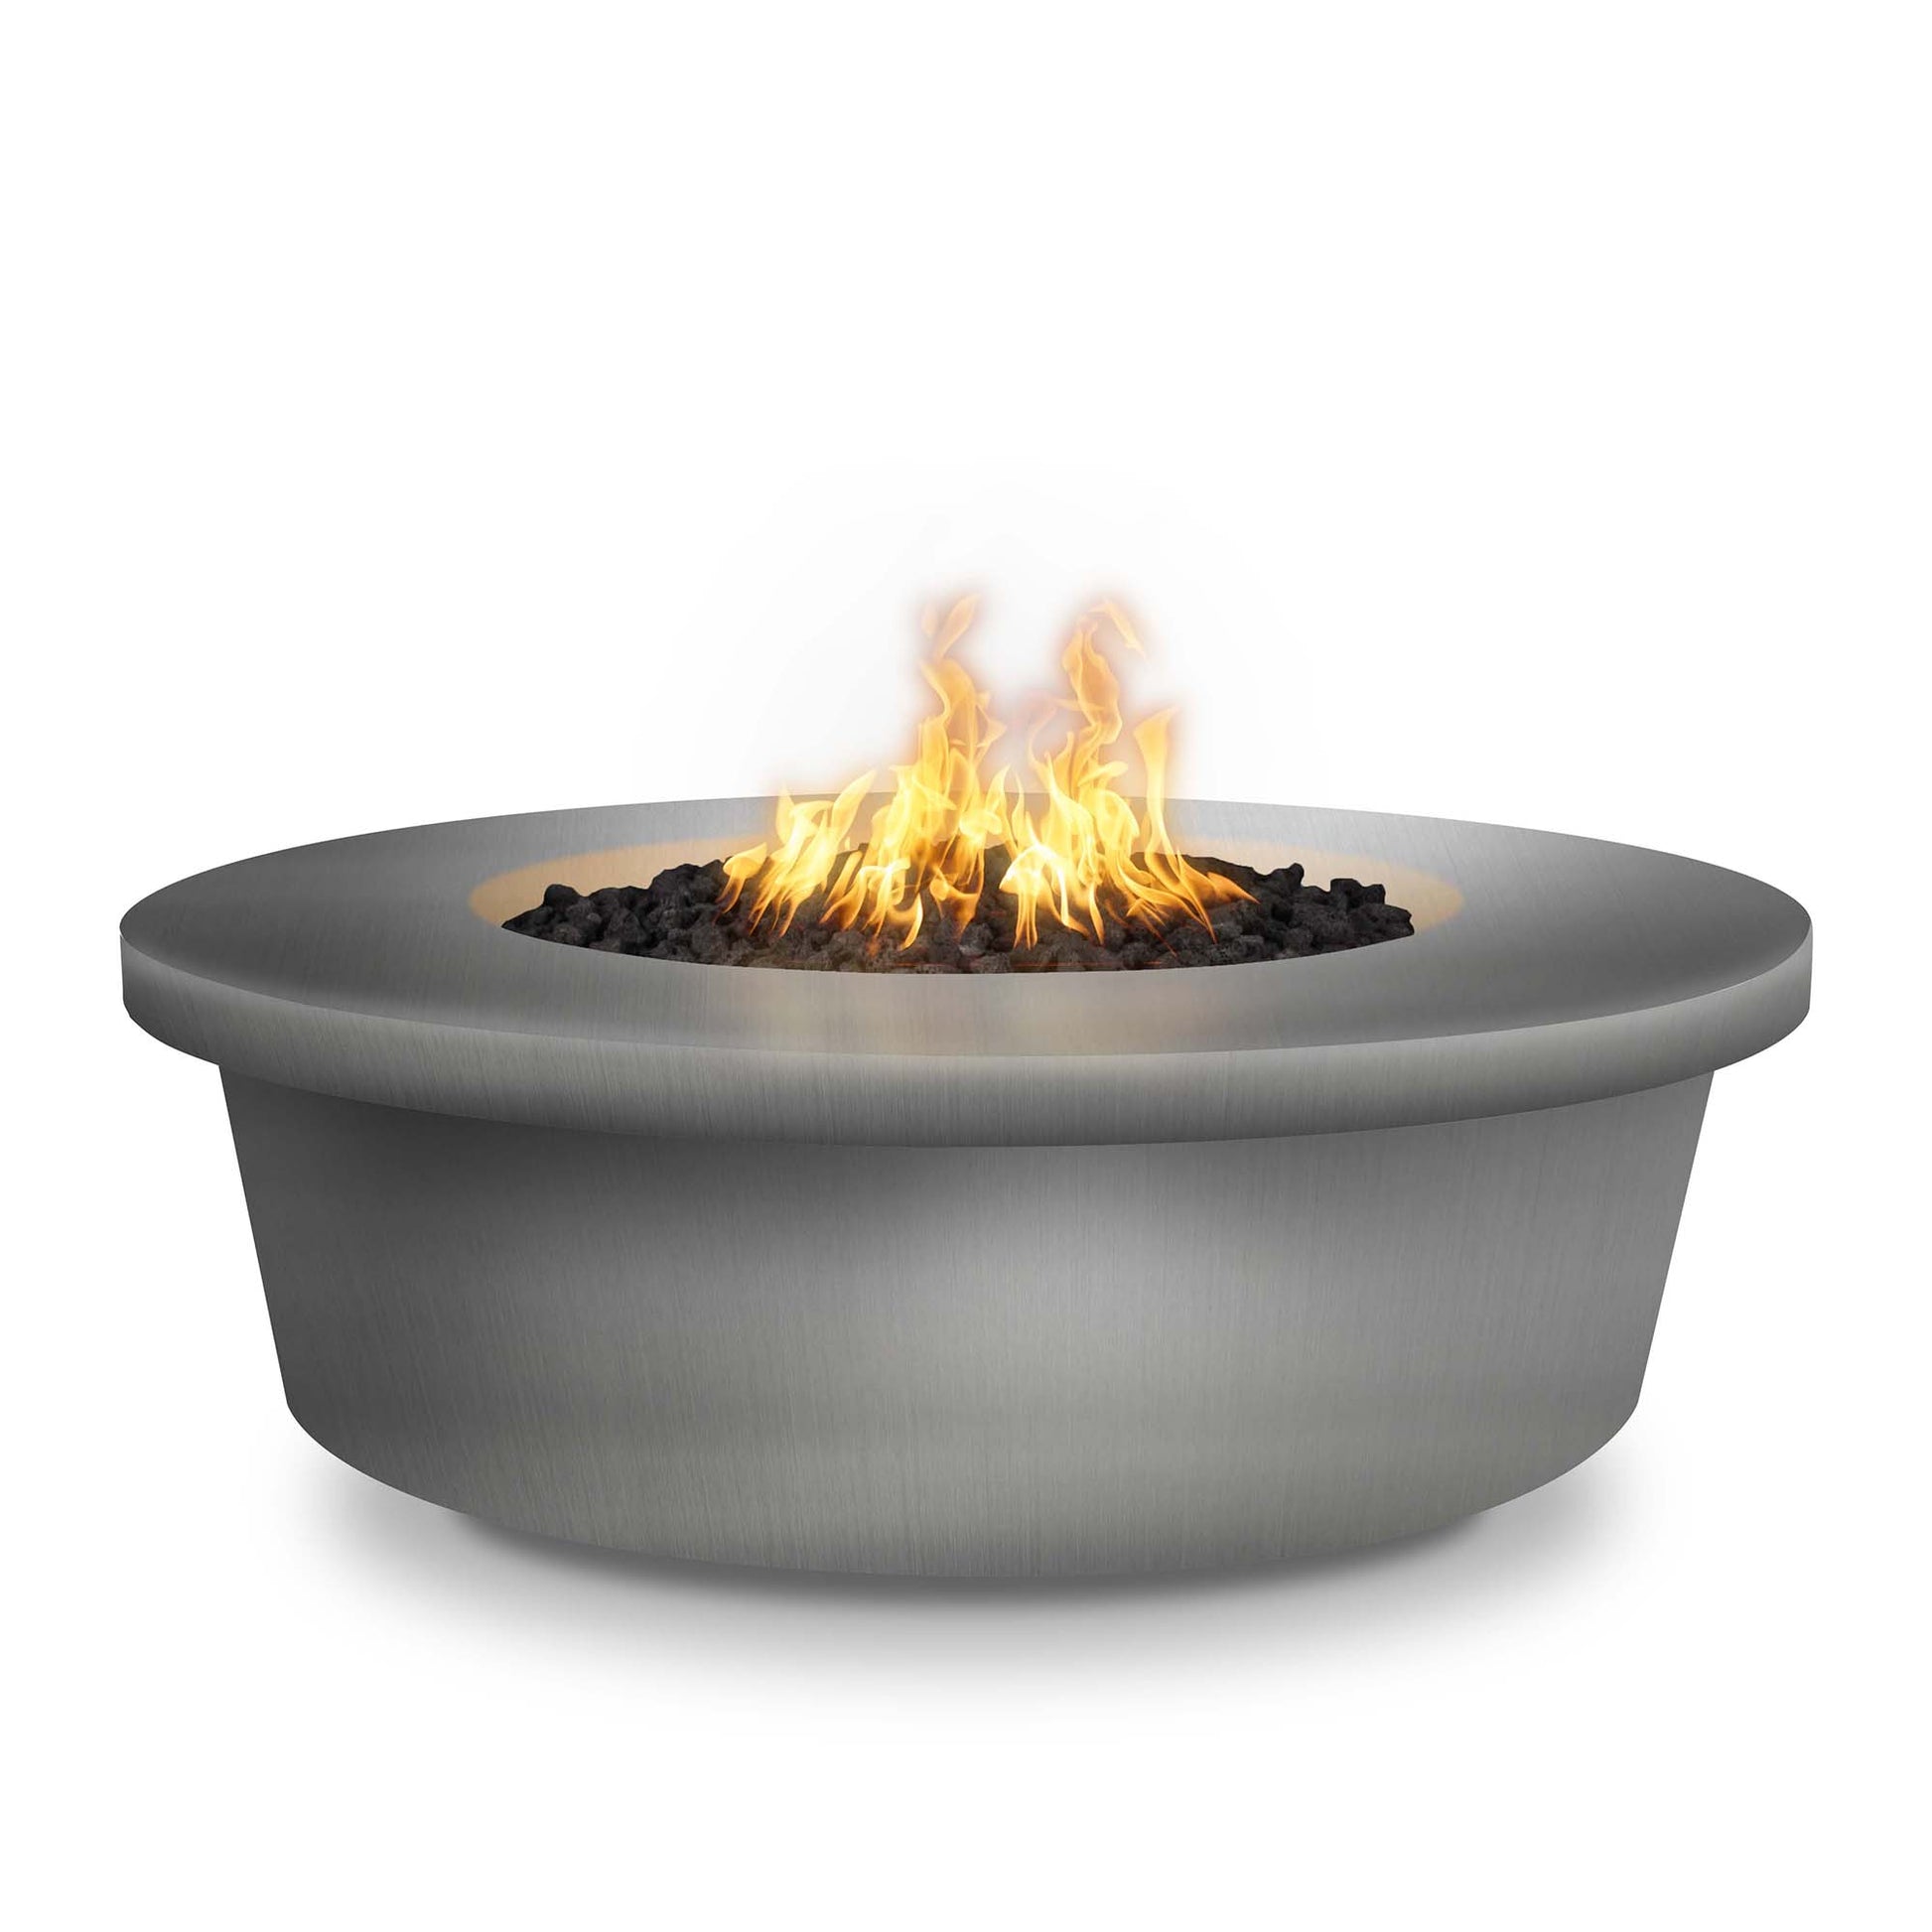 The Outdoor Plus Round Tempe 48" Hammered Copper Liquid Propane Fire Pit with Match Lit with Flame Sense Ignition